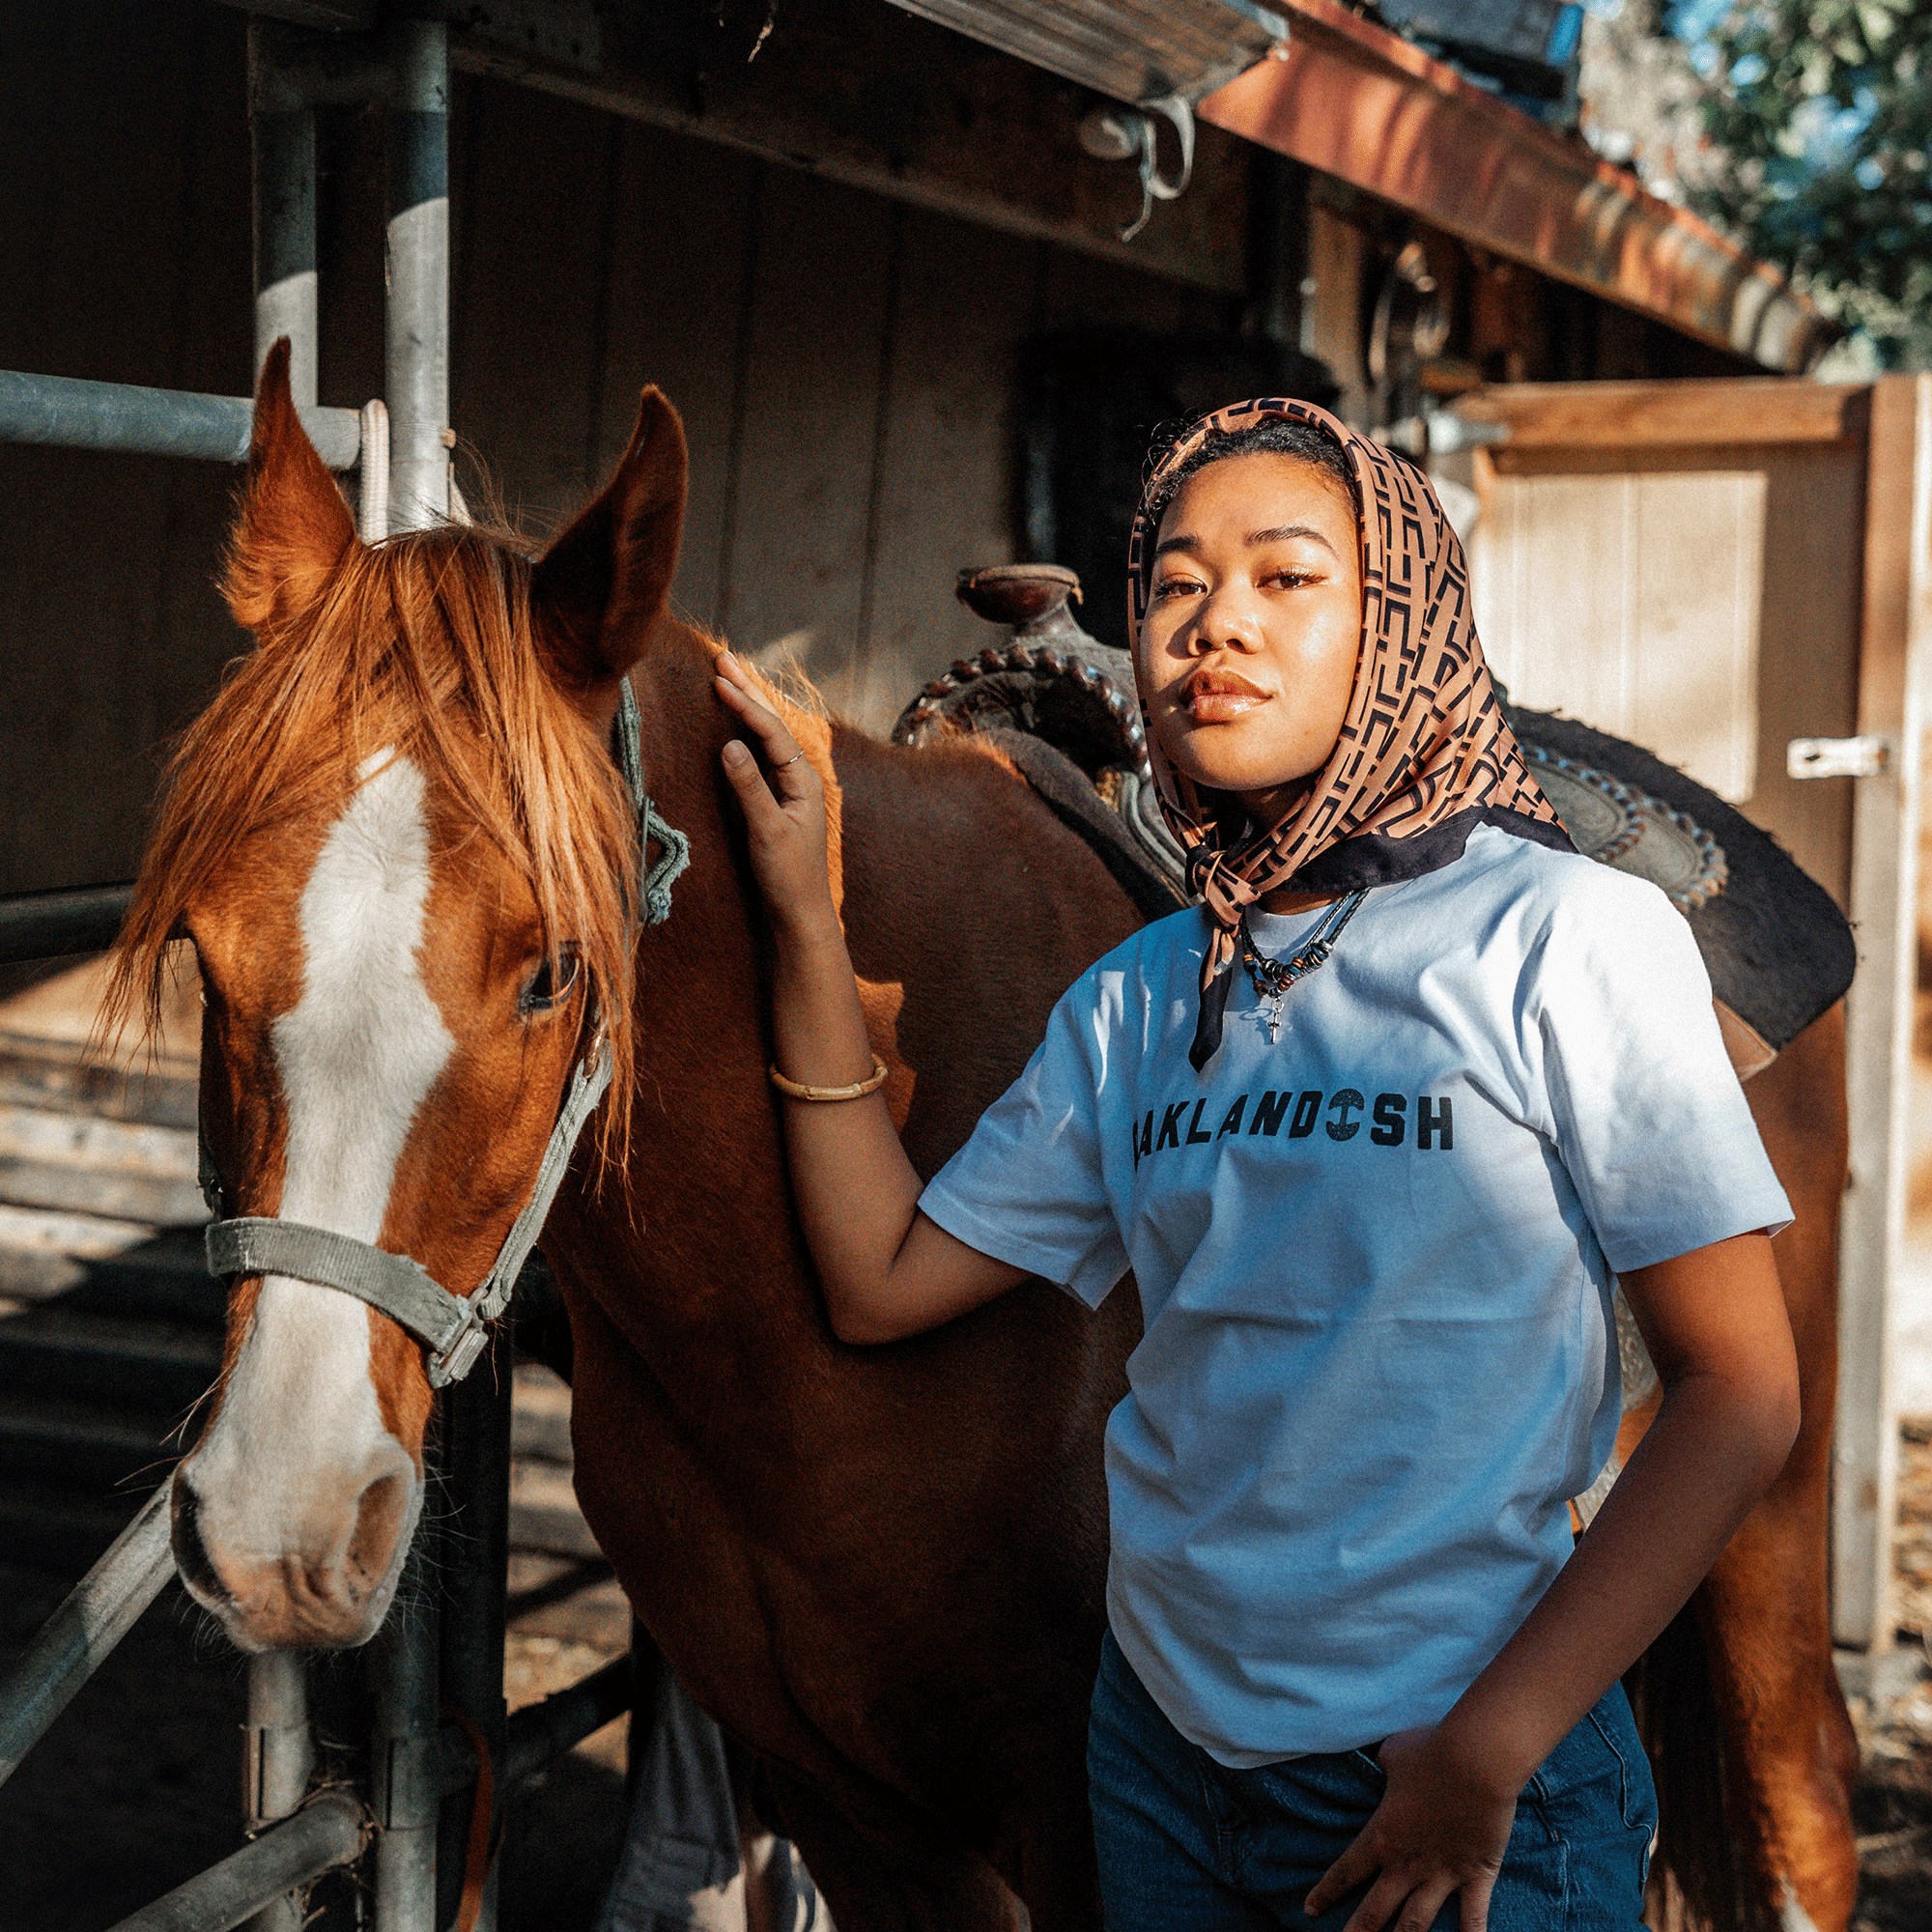 Model with horse wearing cotton white t-shirt with Oaklandish Wordmark and Oaklandish tree logo in place of 'i'.